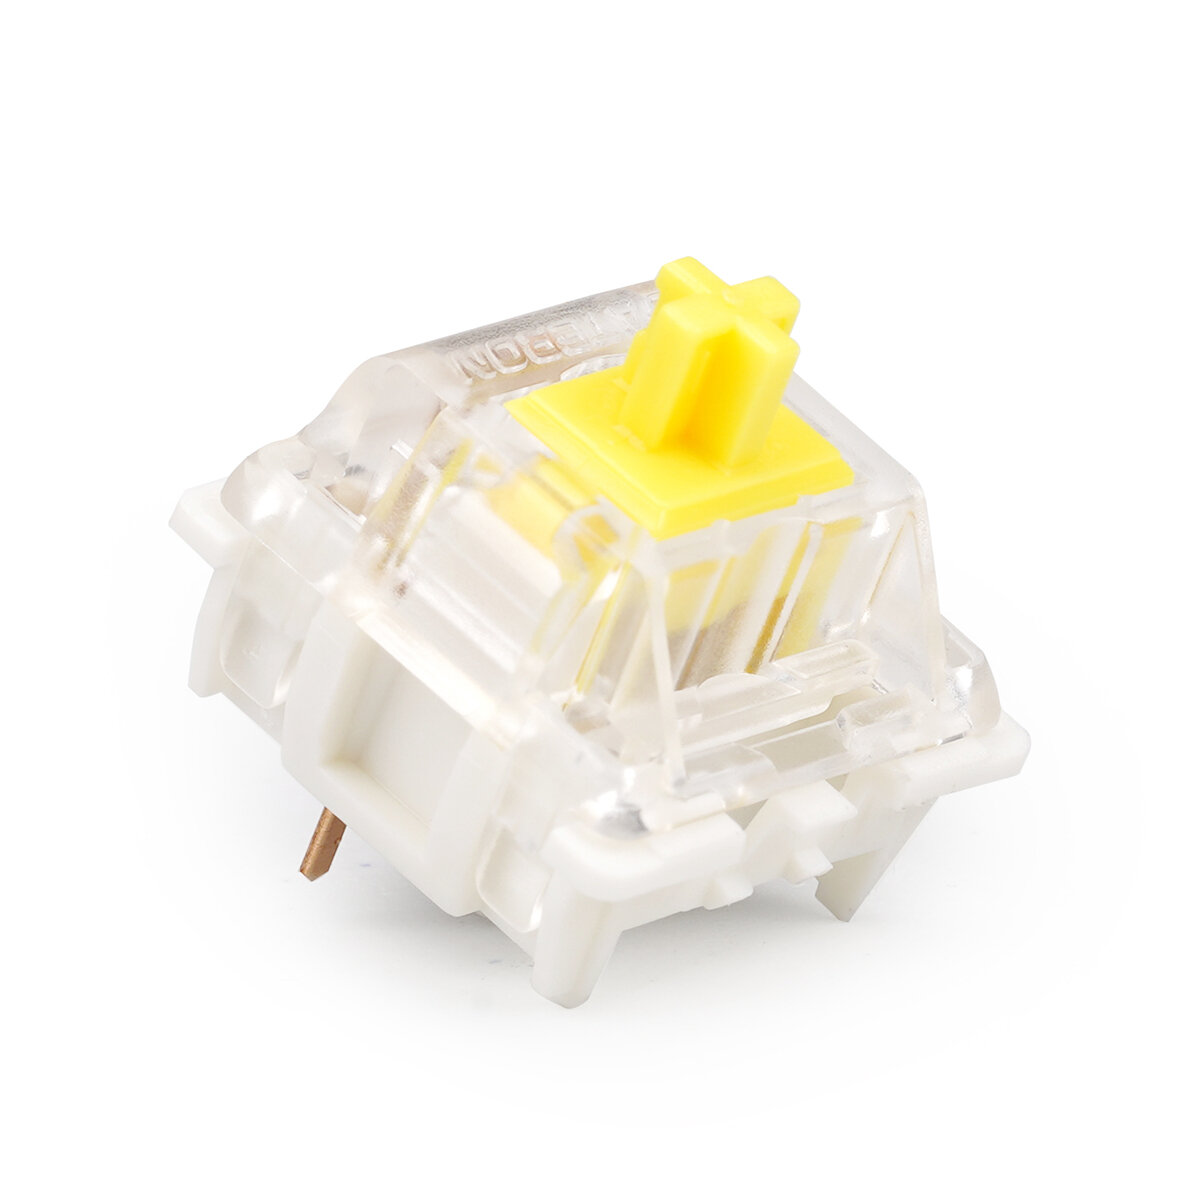 70Pcs/pack Gateron Switch Linear Mechanical Yellow / Red Pro Switch Prelubricate Keyboard Switch for DIY Mechanical Gami